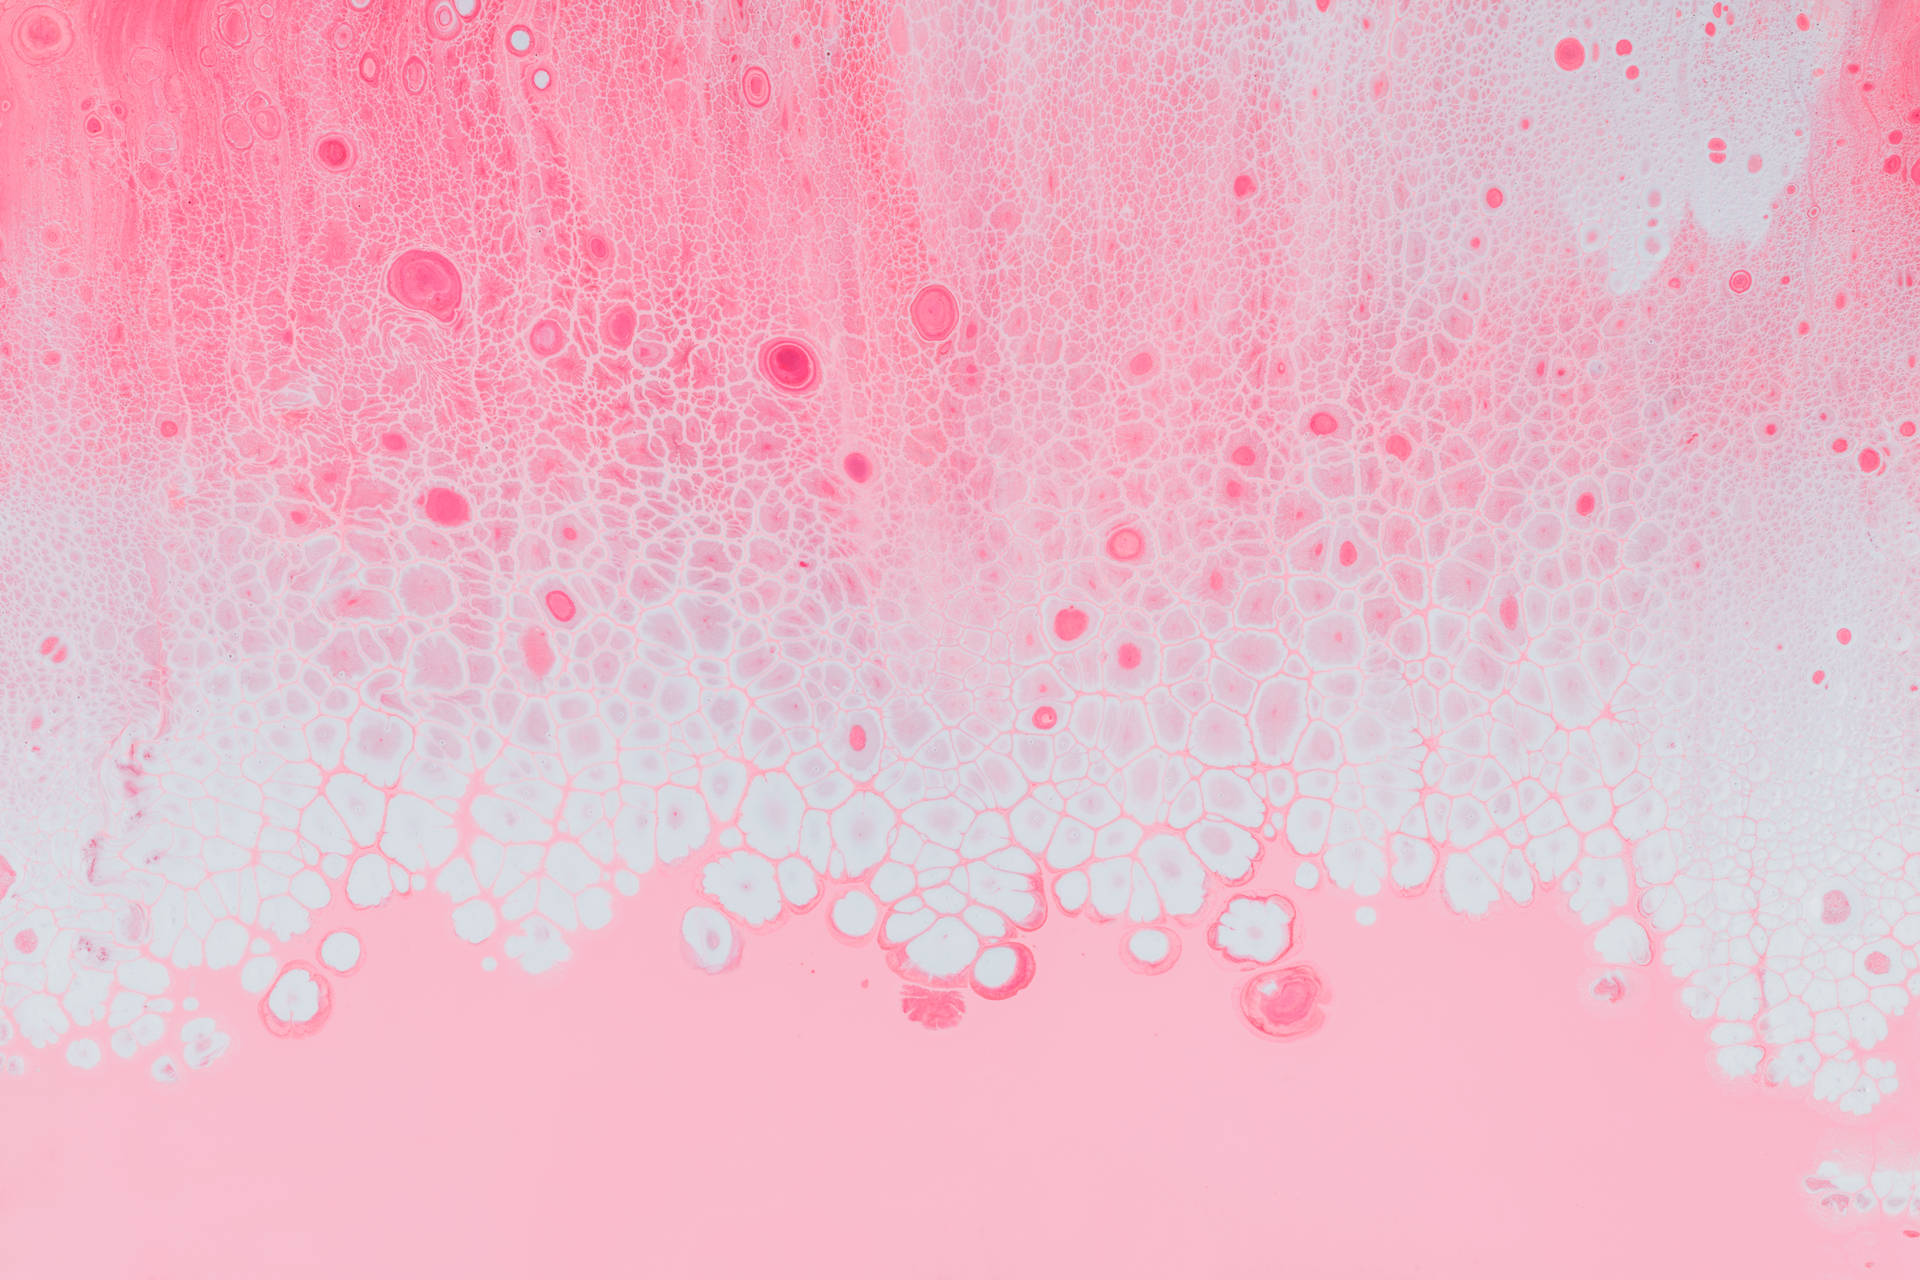 Pink Wall With Textured Paint